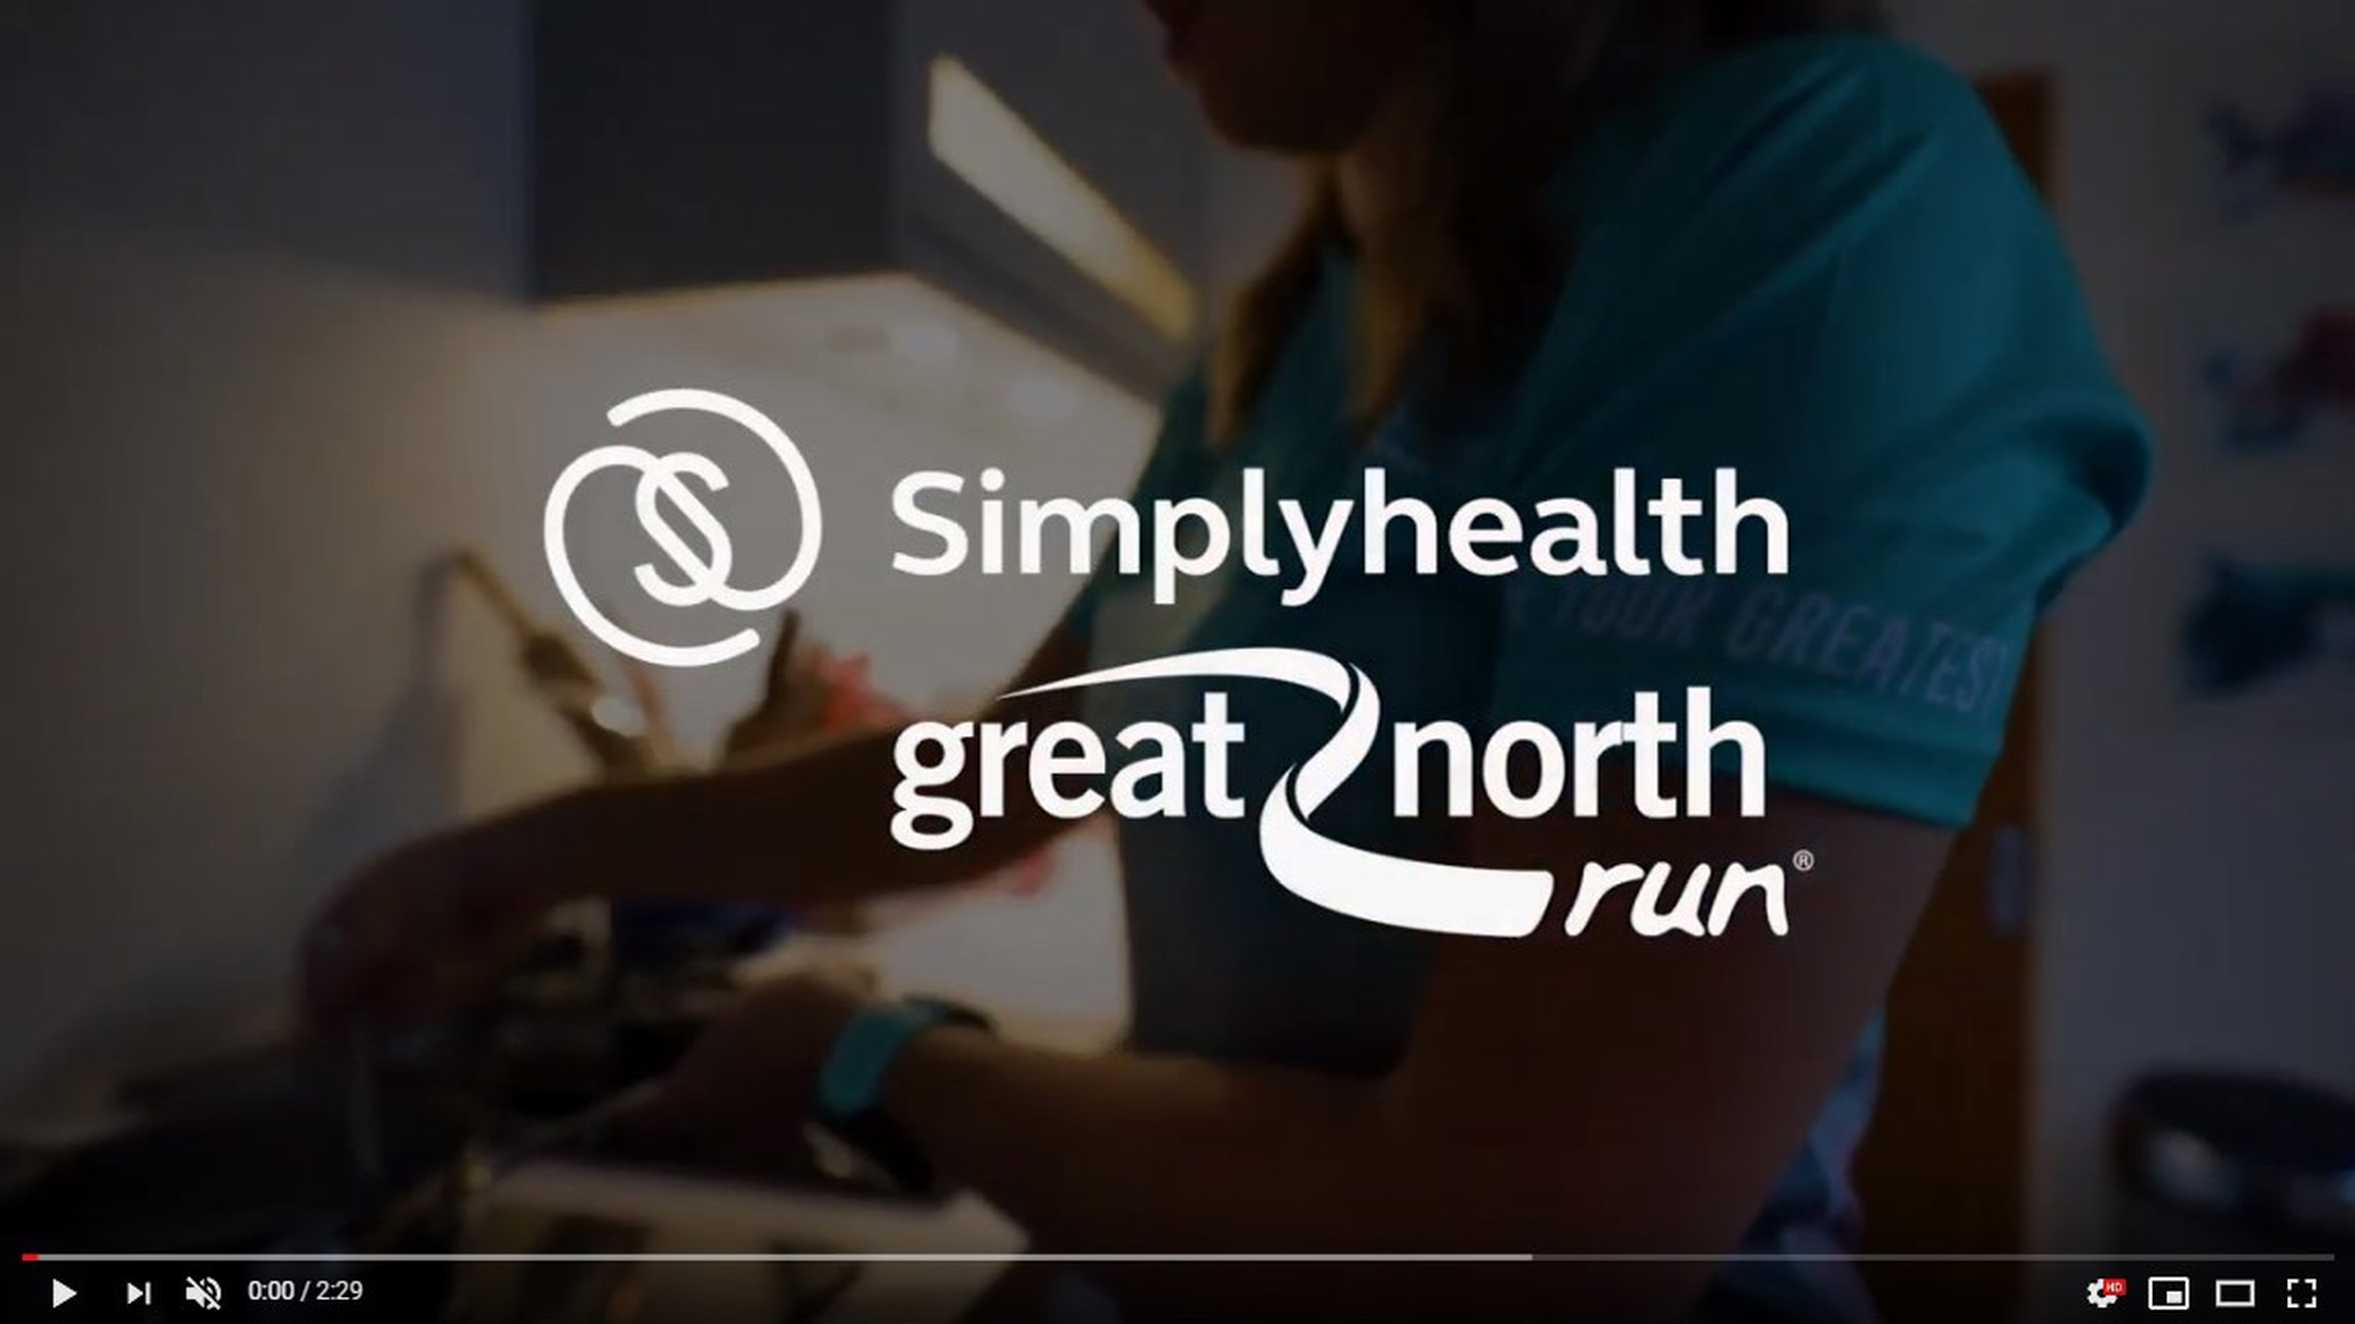 A still taken from the Great North Run promotional video